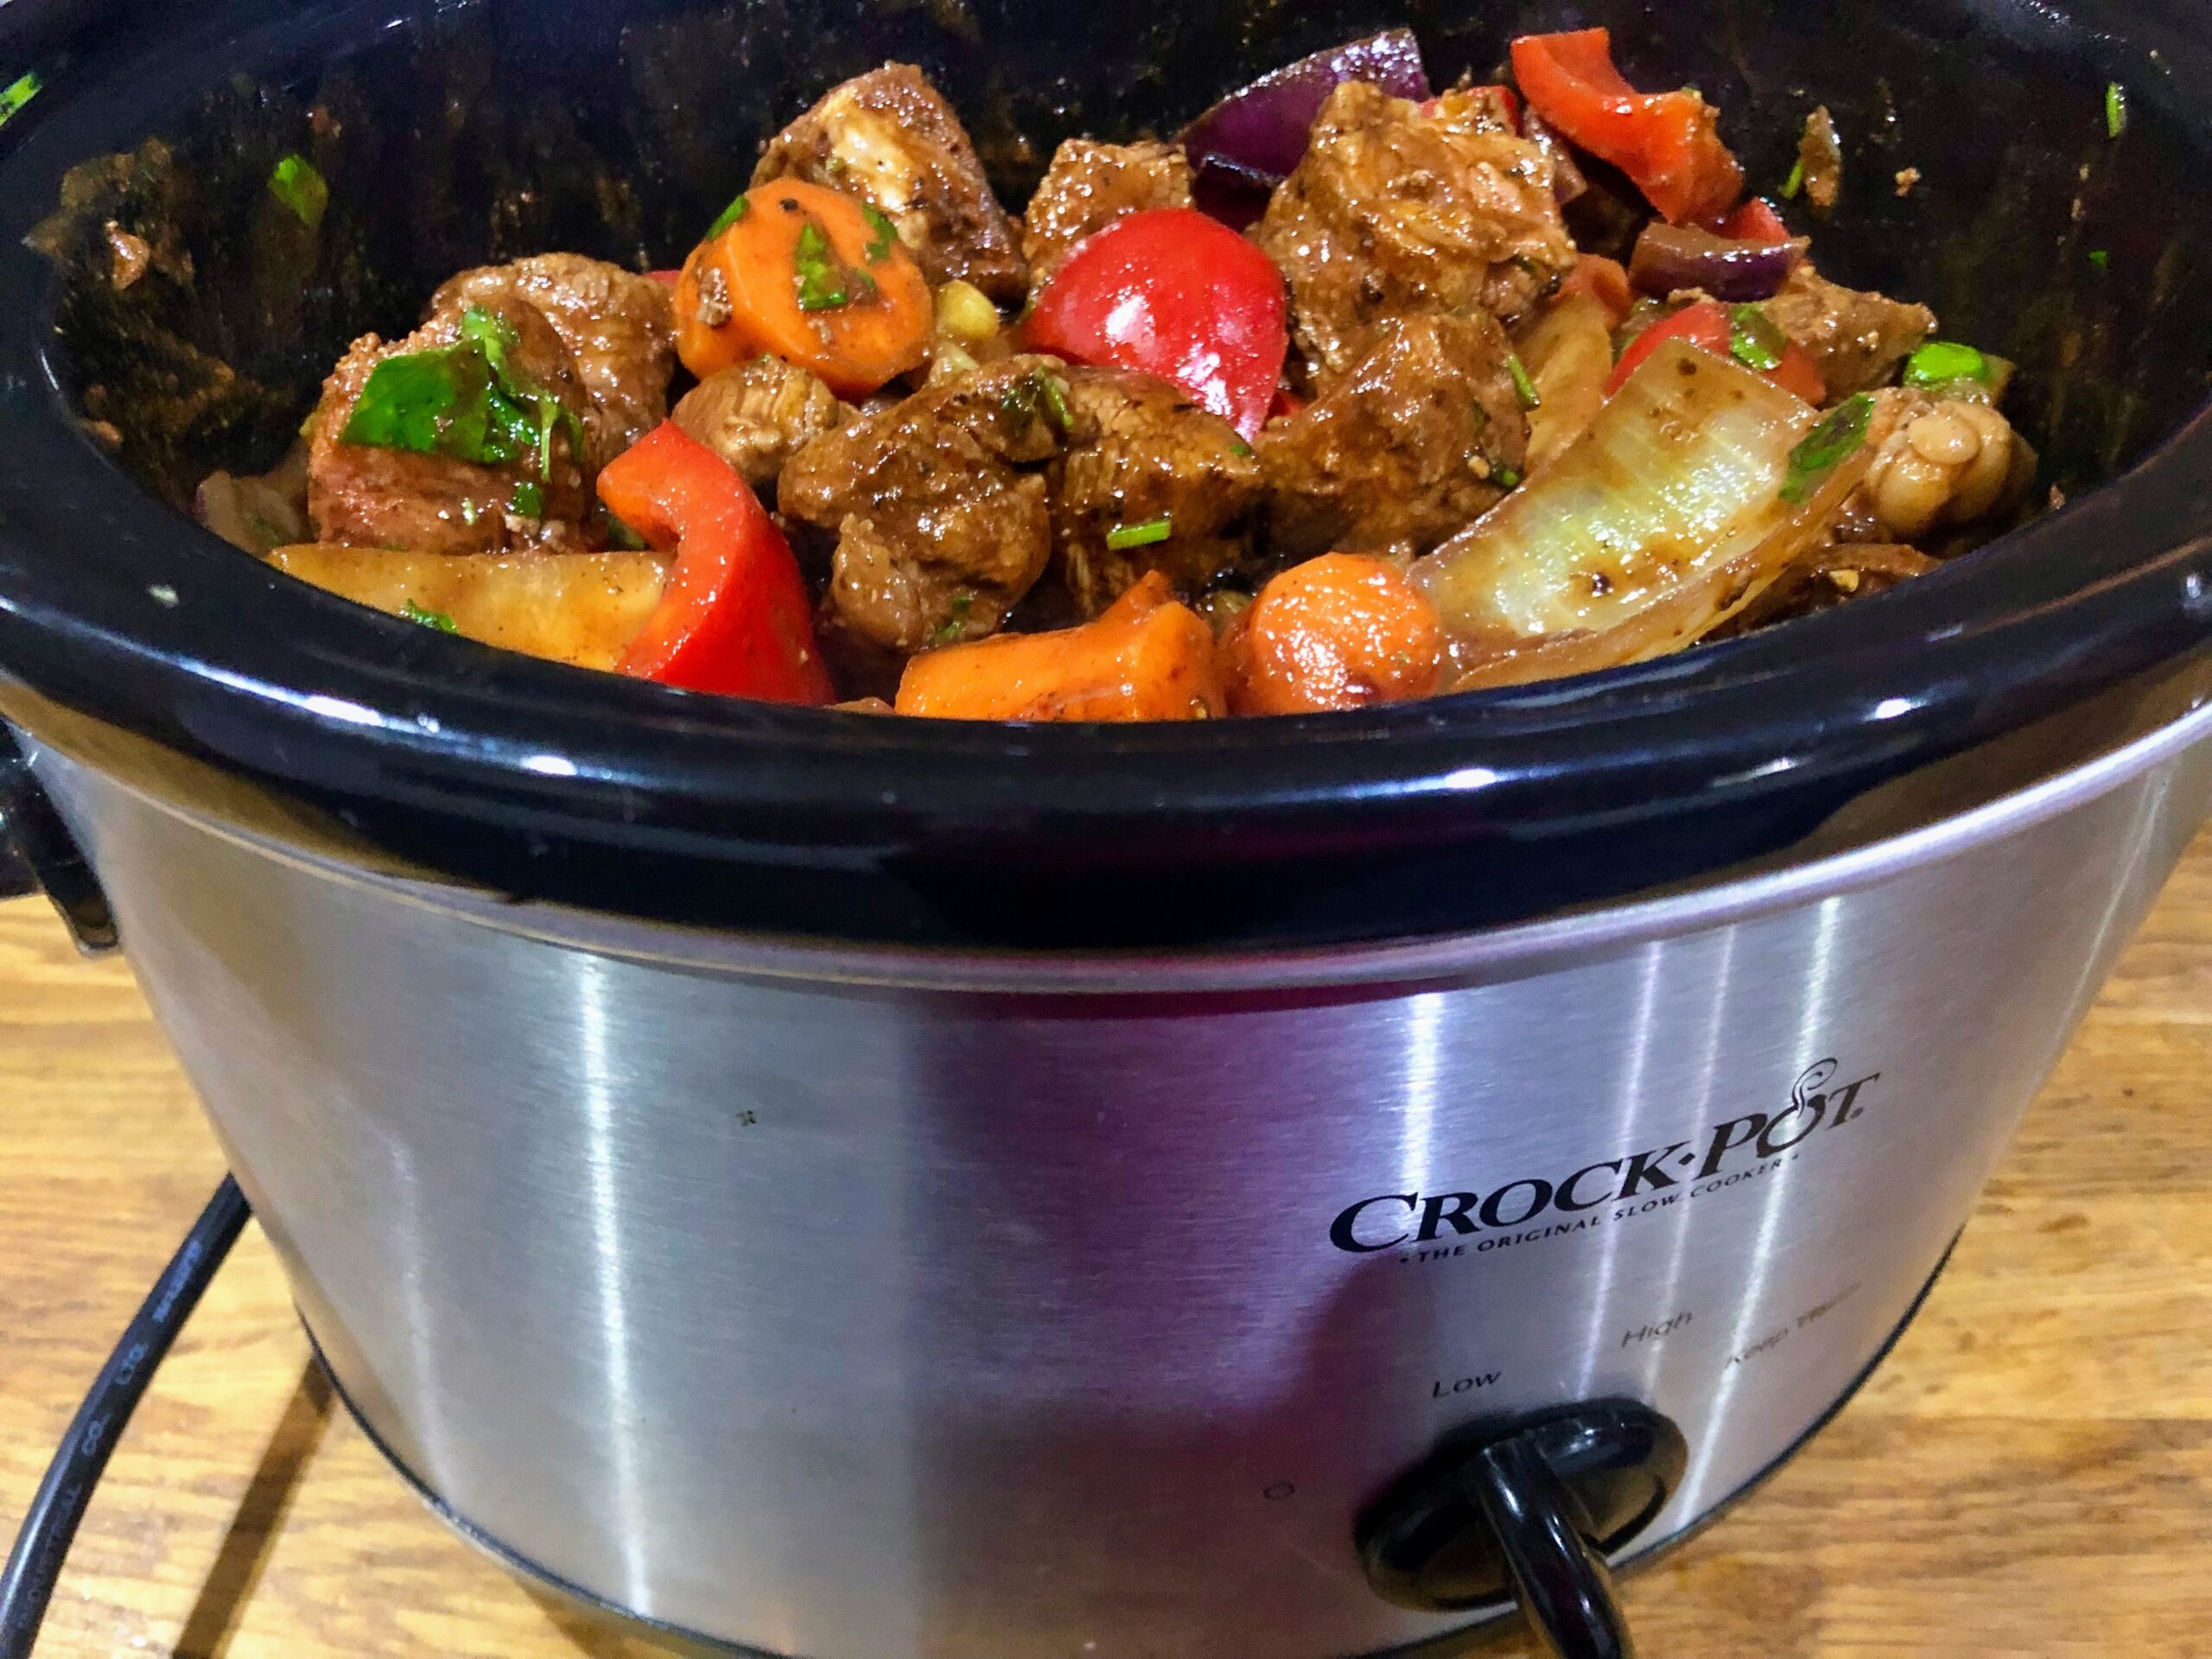 Crockpot filled with paprika beef